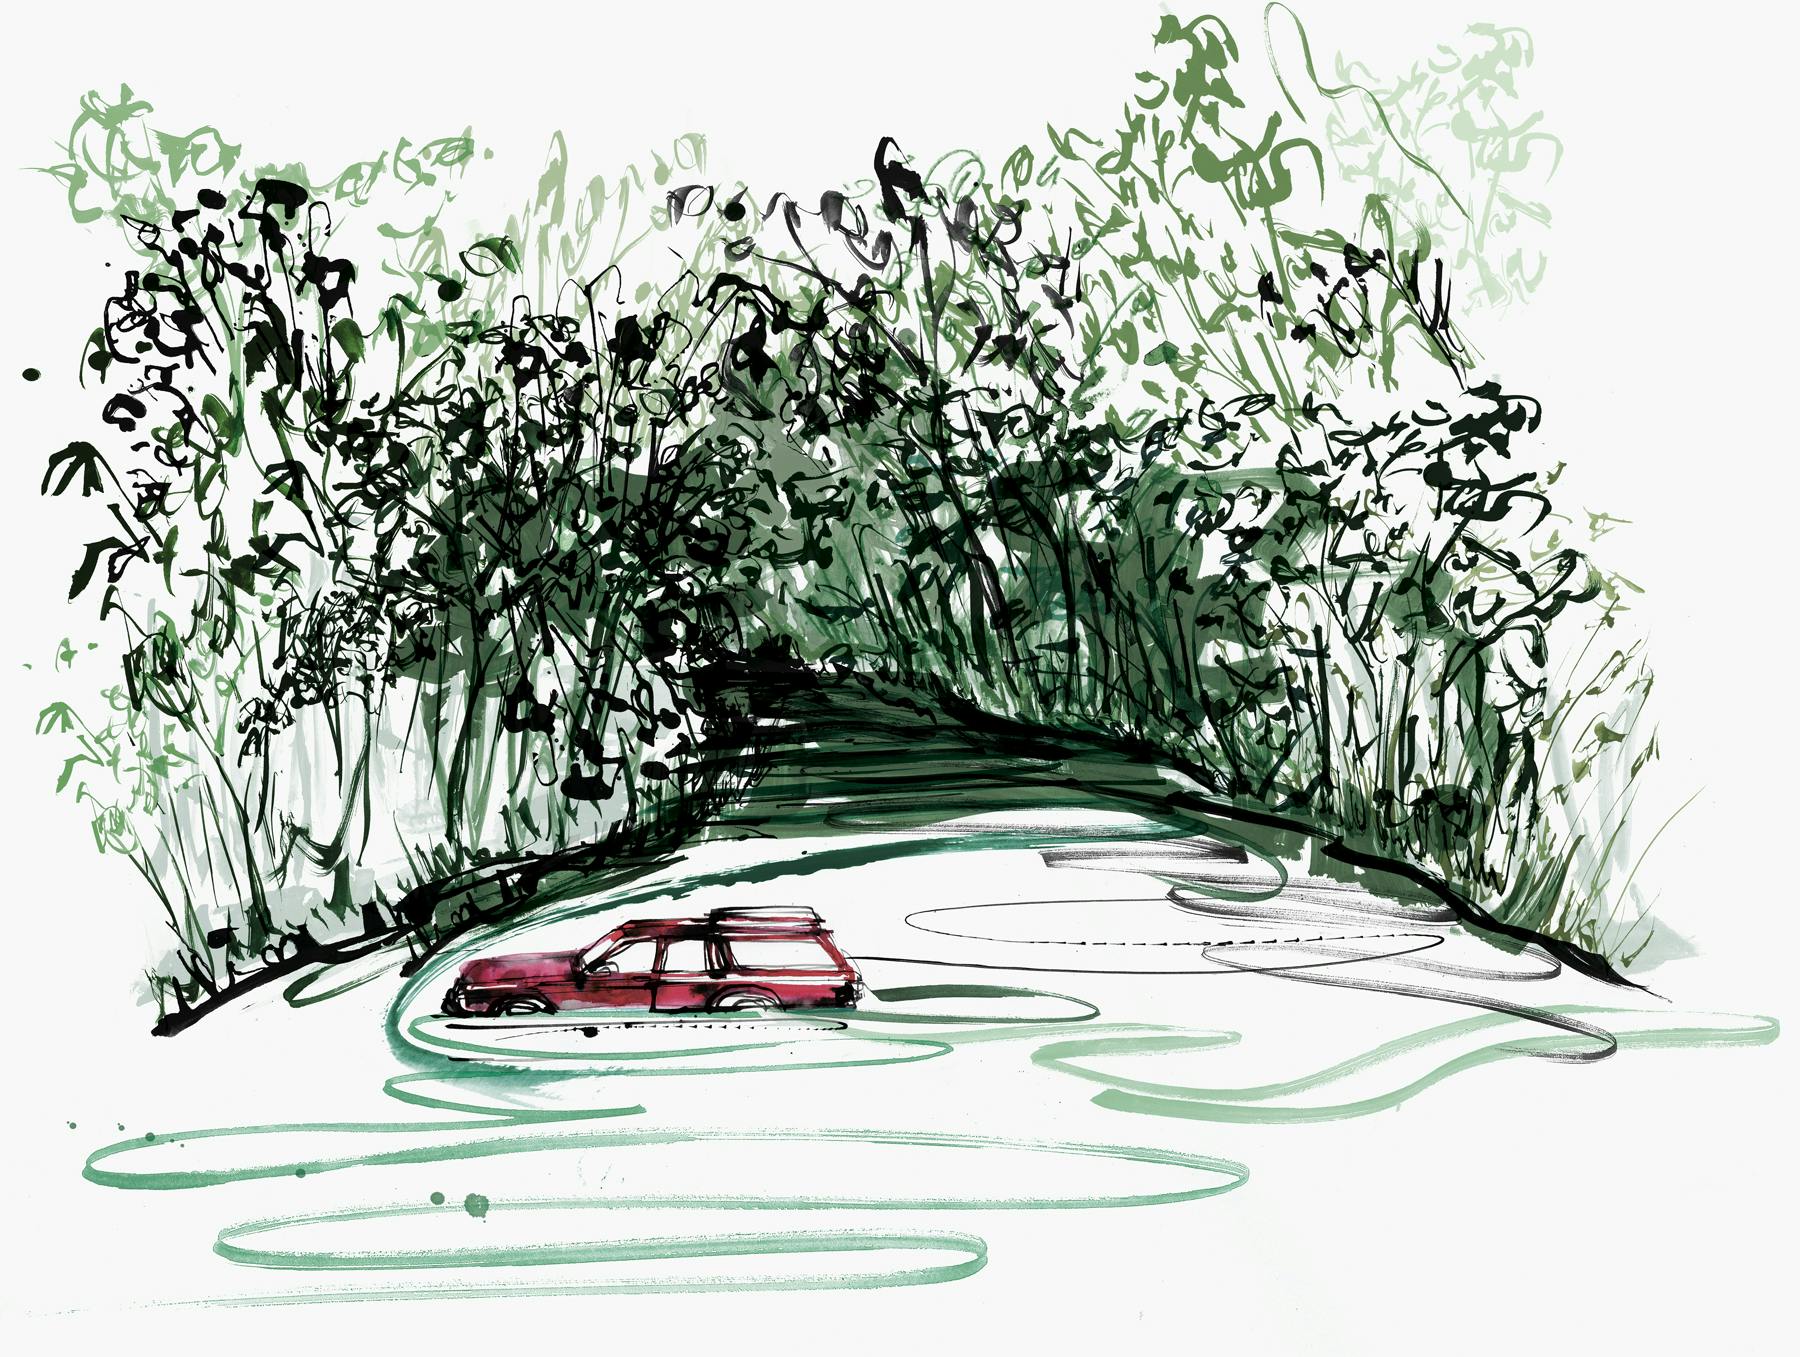 A colorful drawing of a station wagon wading through some water in some green woods.